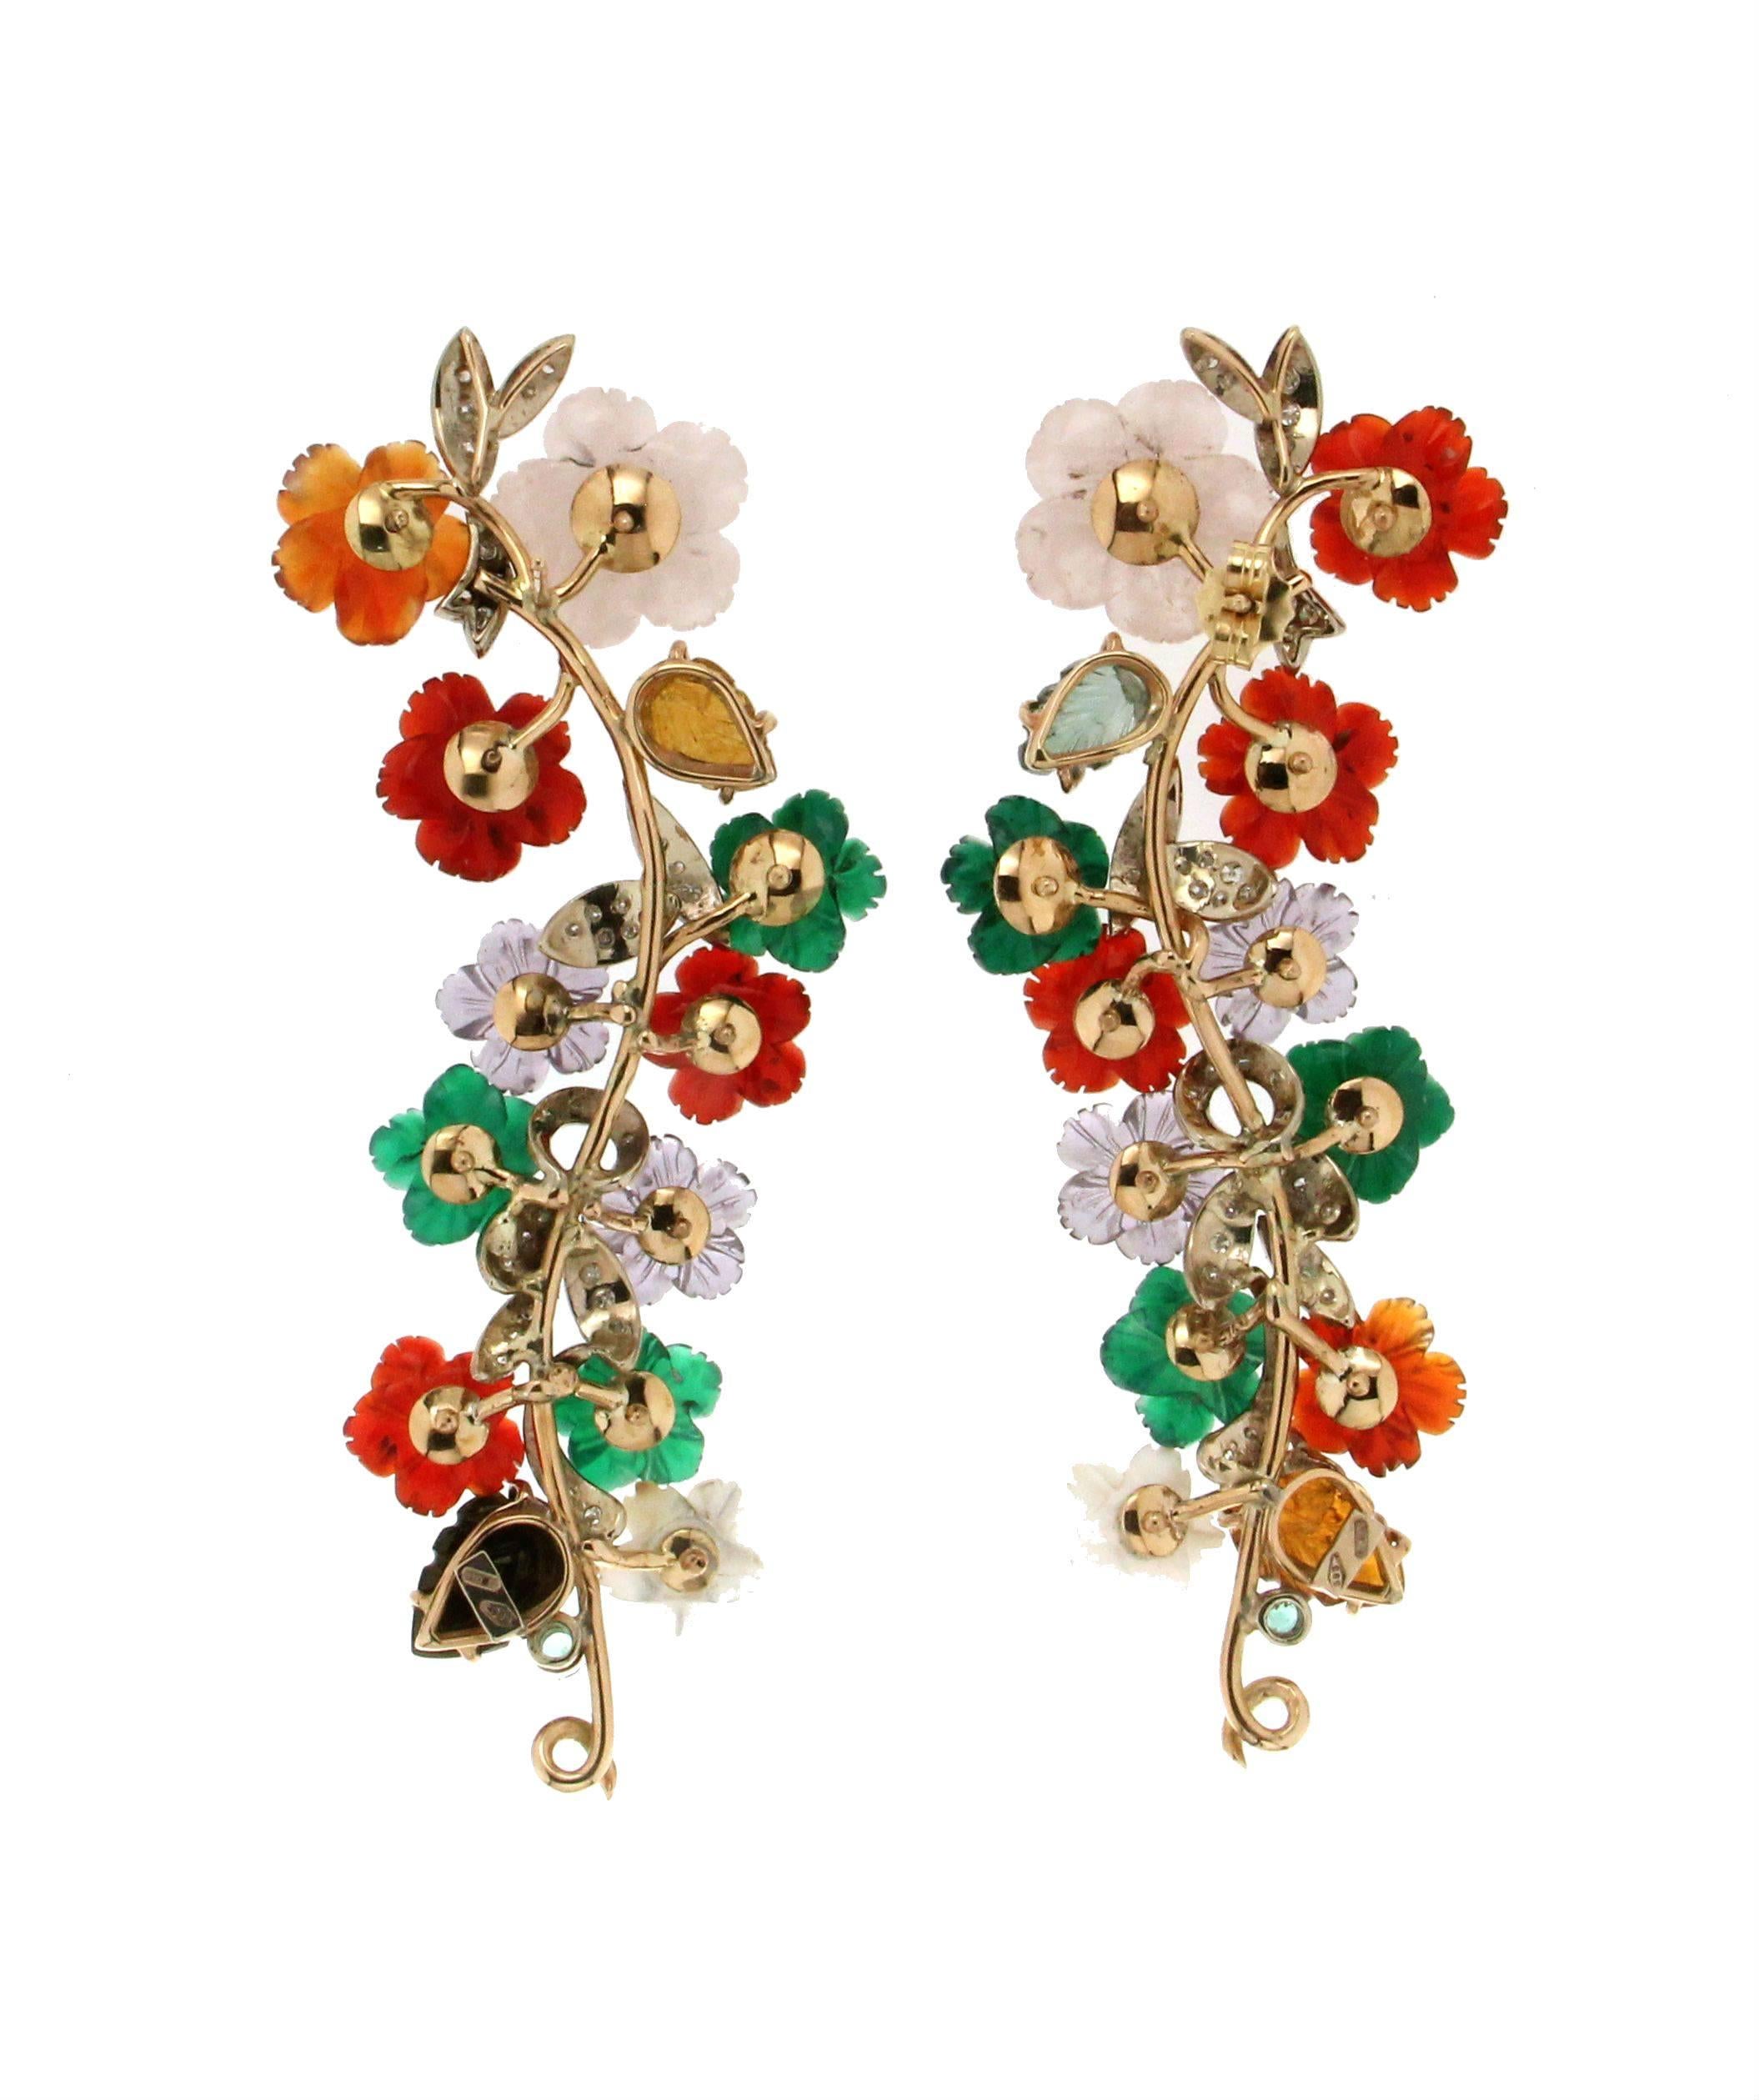 Flowers 14 Karat Yellow Gold Diamonds Stud Earrings.
the flowers are composed of carnelian, mother-of-pearl, agate,tourmaline and amethysts

Earrings Gold weight 17.80 grams
Earrings total weight 26.50 grams 
Diamonds weight 0.80 karat
Emeralds